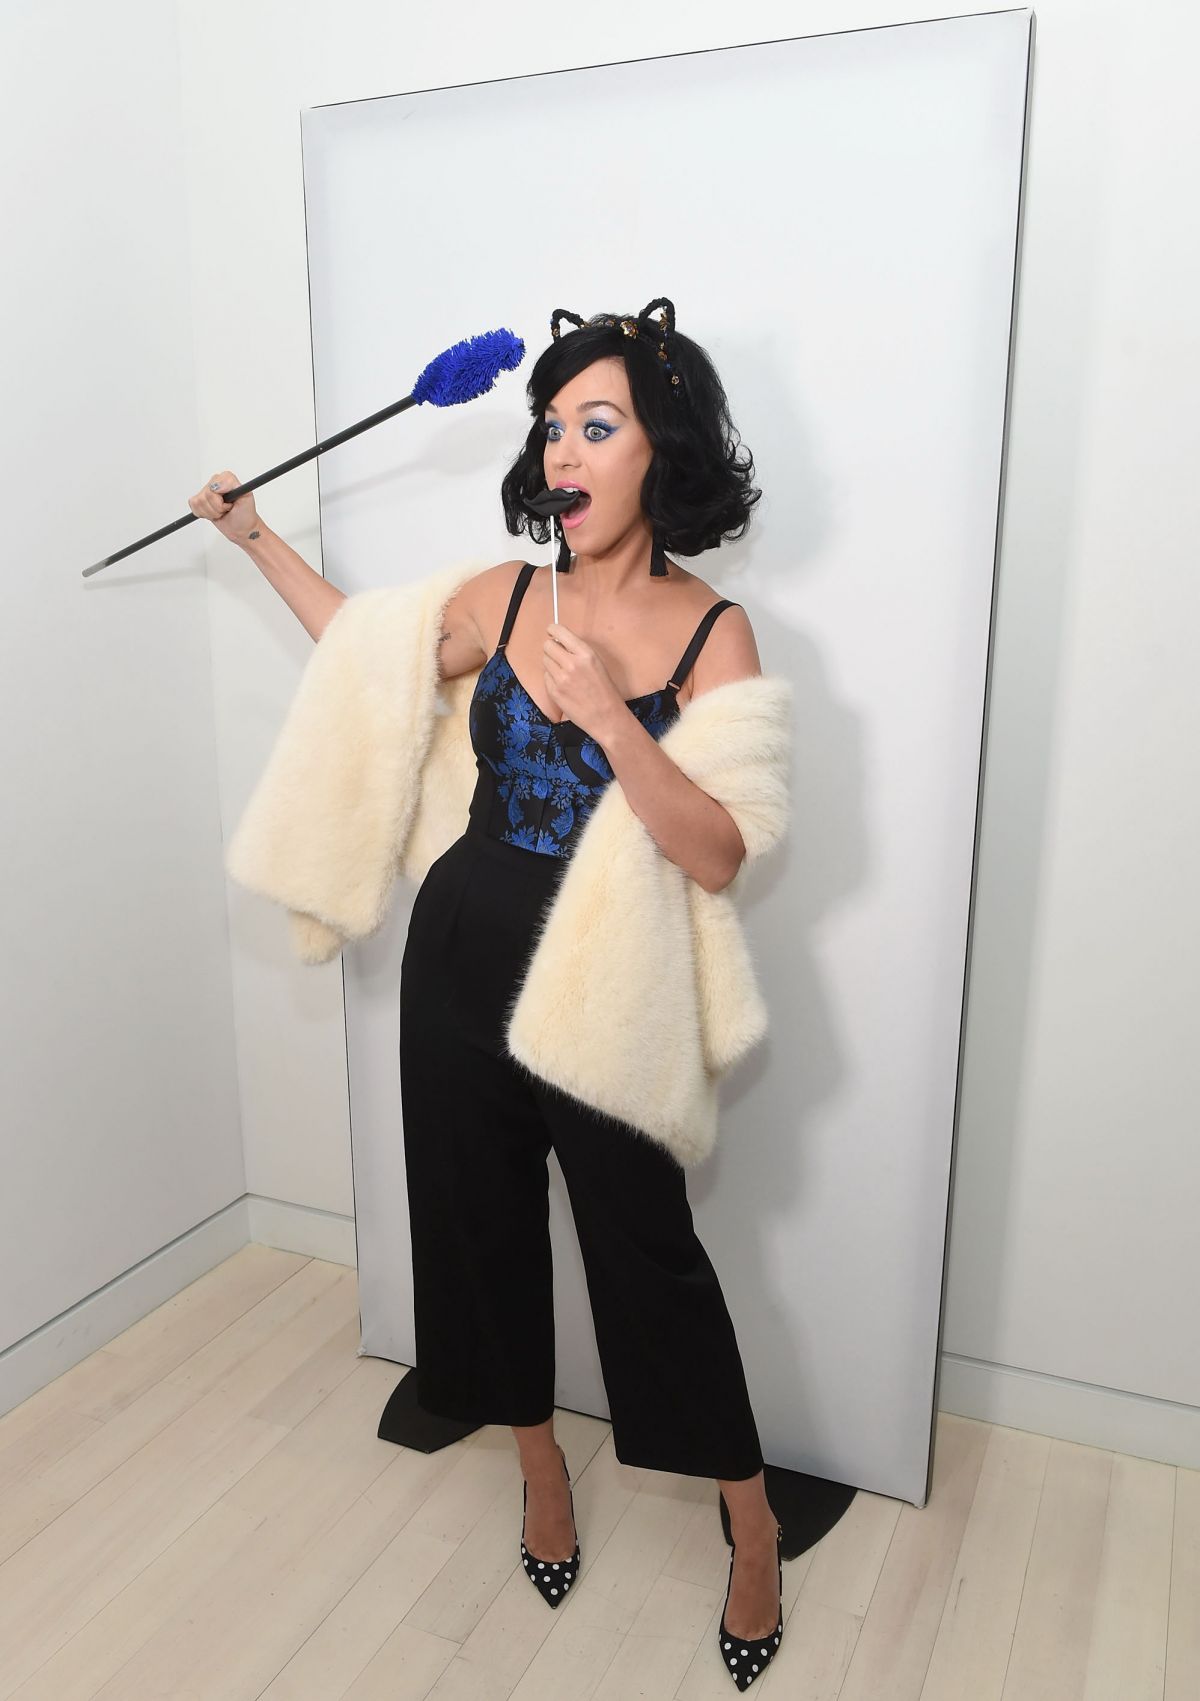 katy-perry-at-covergirl-katy-kat-matte-launch-in-new-york-05-01-2016_13.jpg